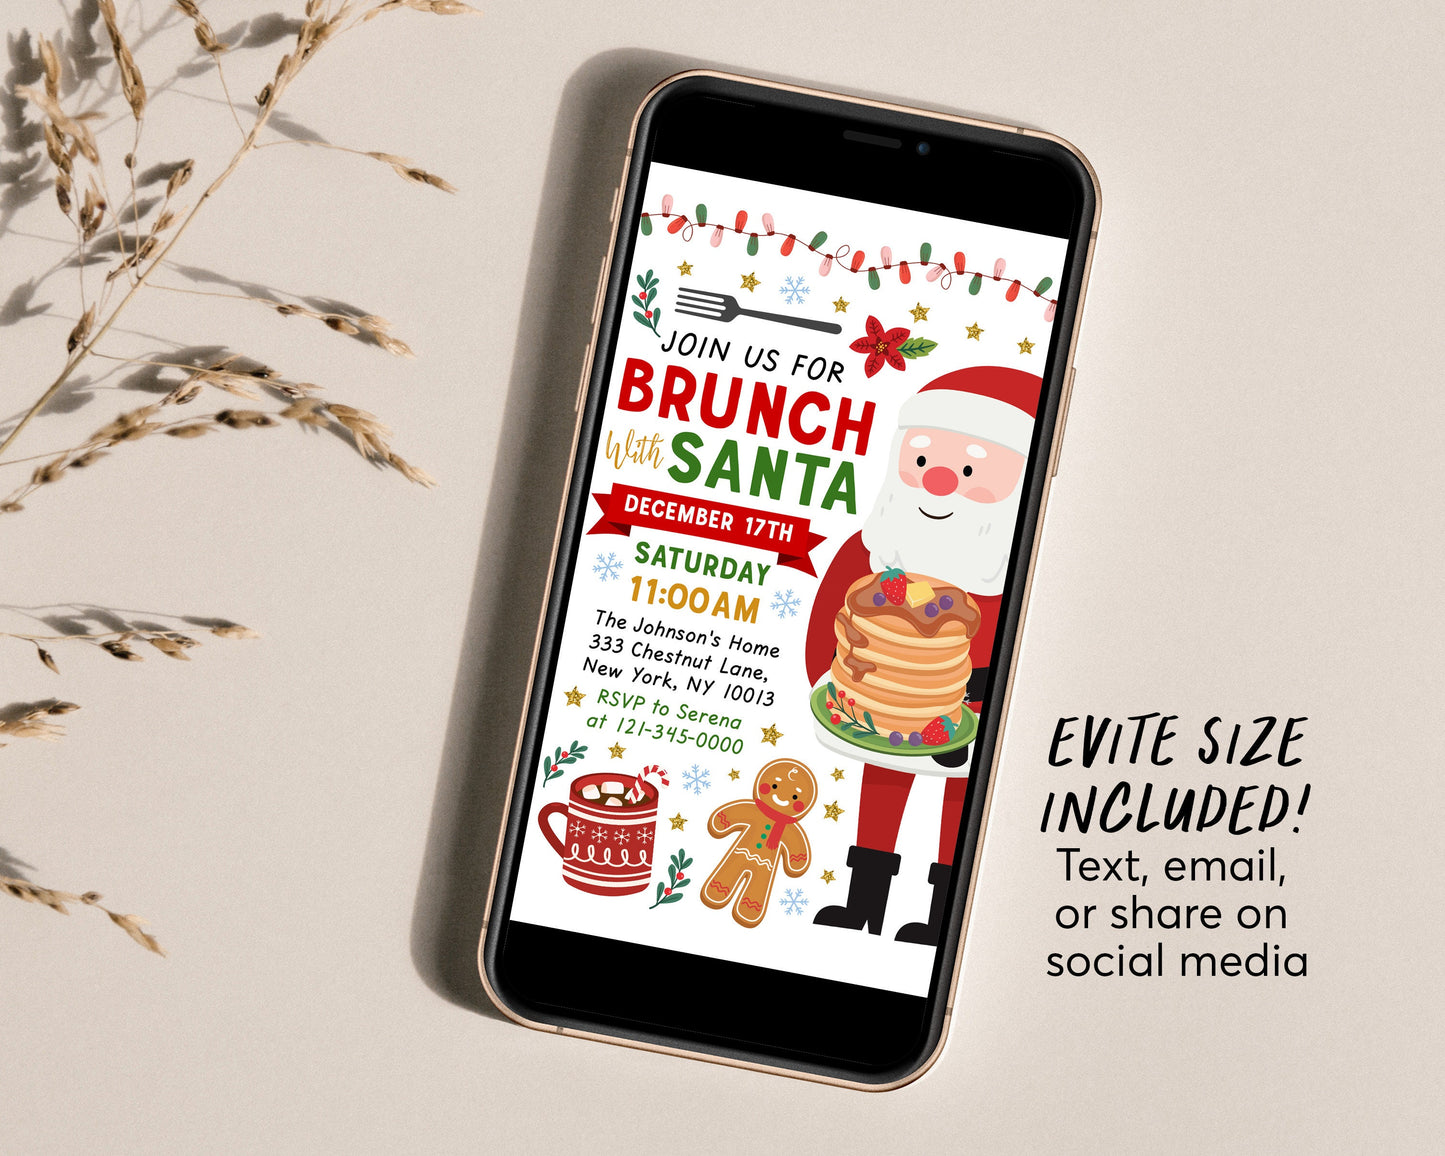 Brunch with Santa Invitation Editable Template, Christmas Party Invite Printable Evite, Holiday Pancakes Breakfast Hot Cocoa Chocolate